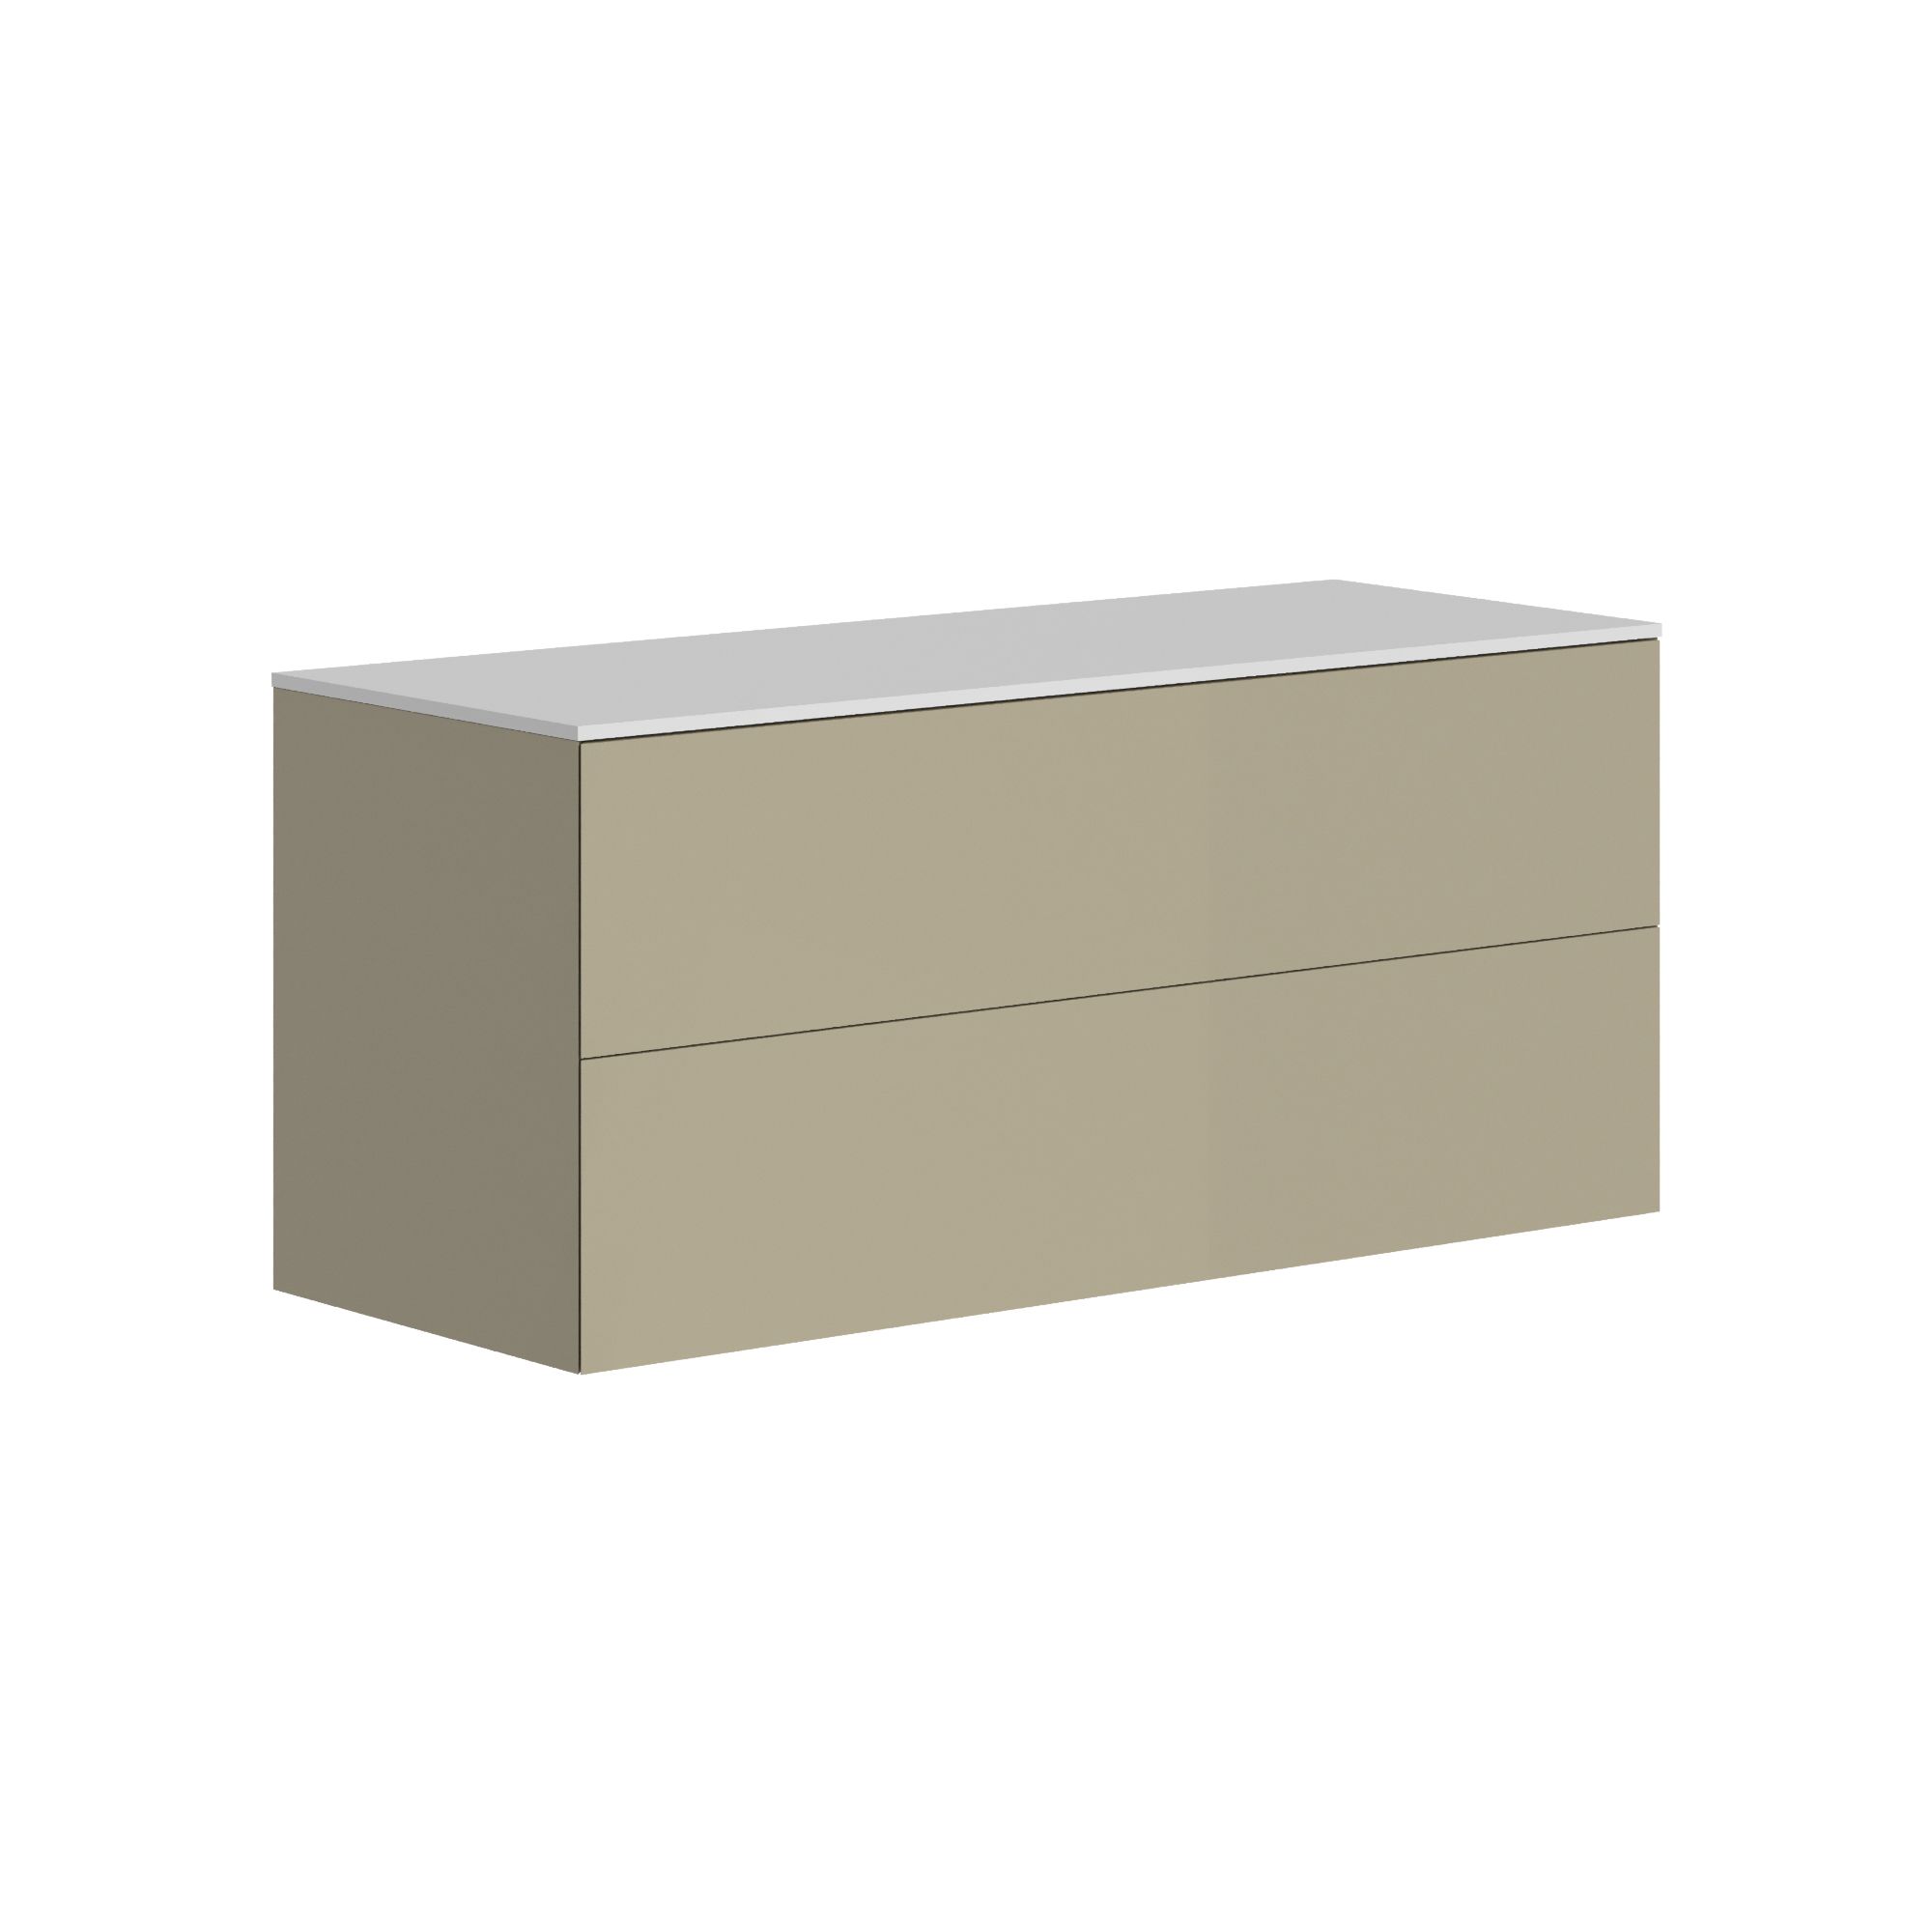 The Ellery Auxiliary Push Open Unit 1200x520mm with Solid Surface Countertop